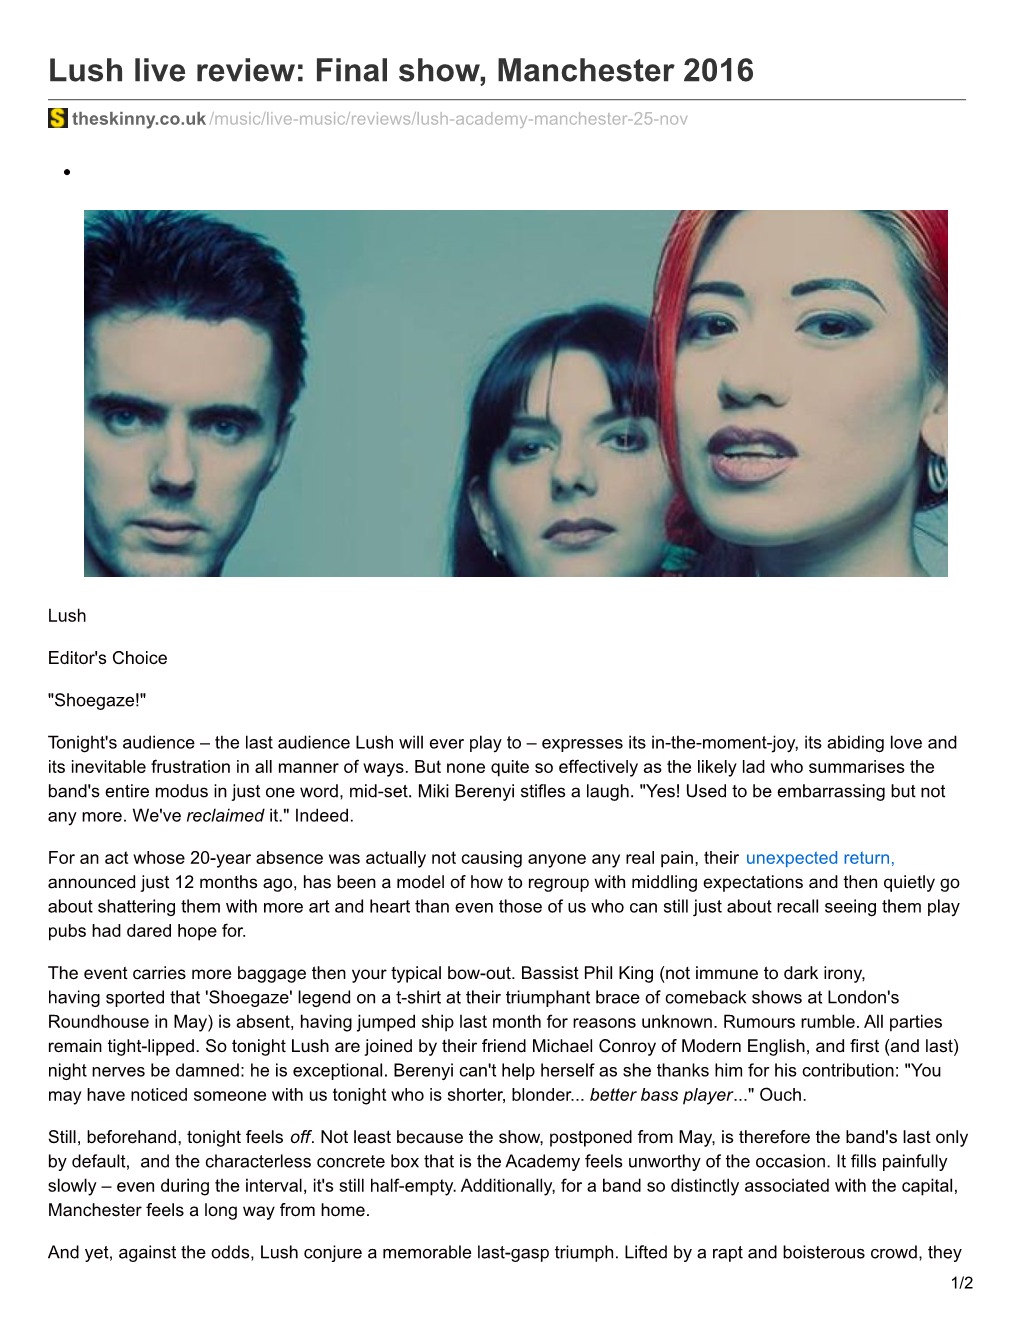 Lush Live Review: Final Show, Manchester 2016